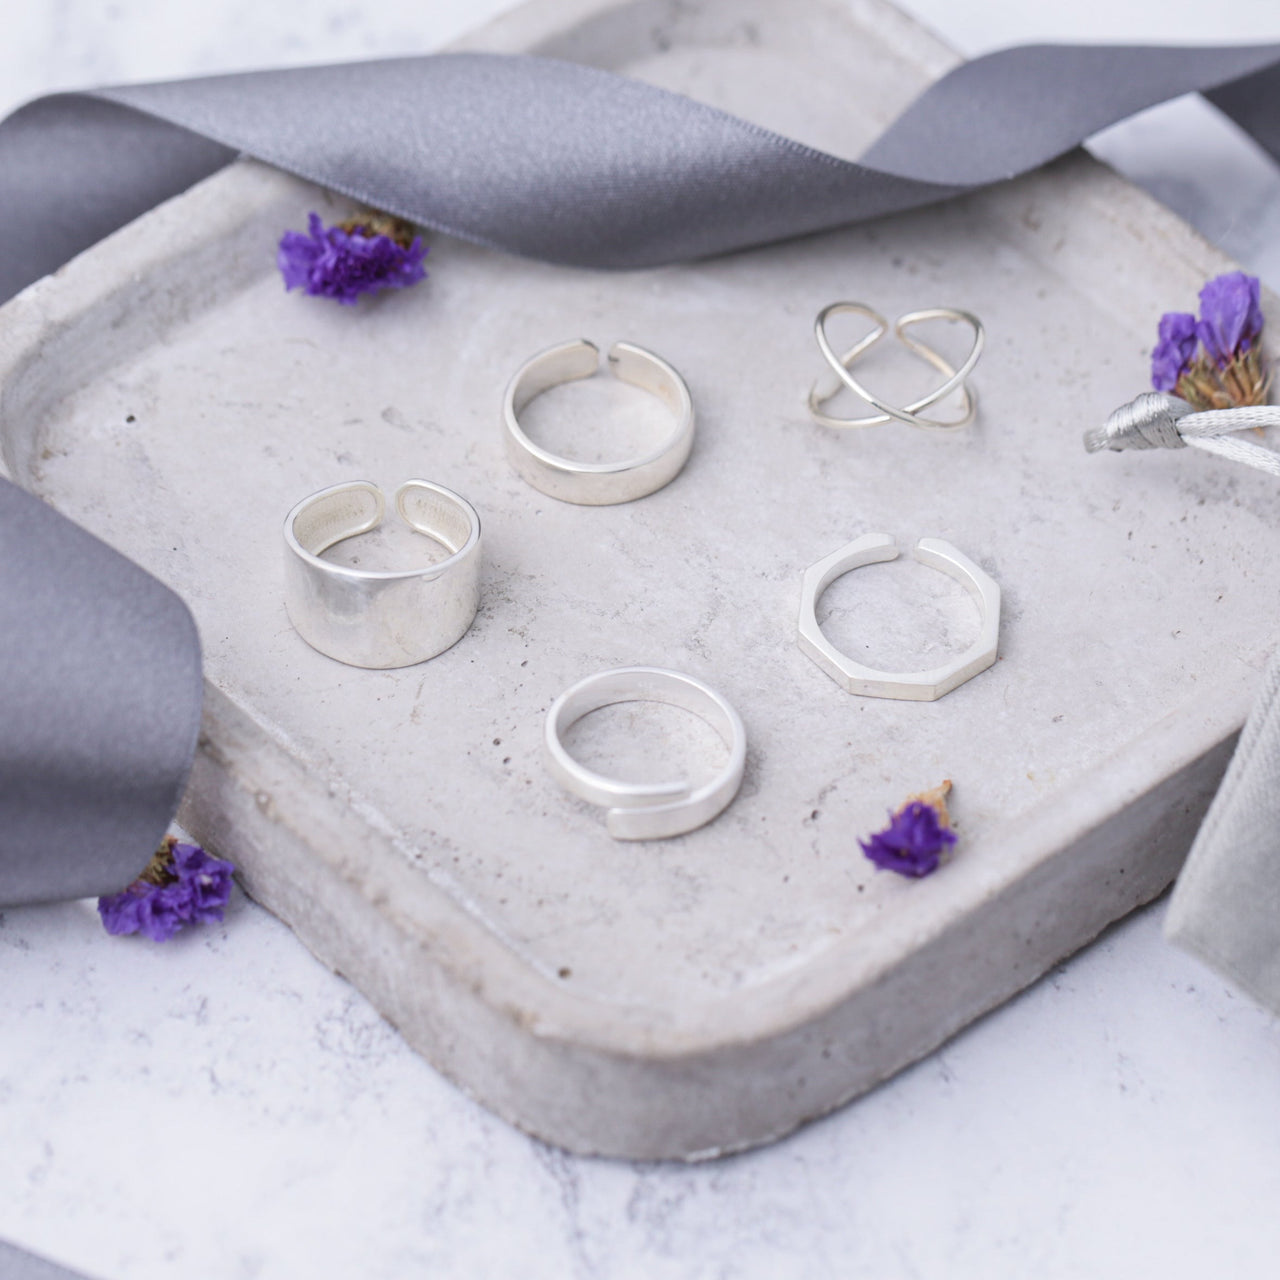 Adjustable 5 Ring Set Check out our full range of Boho Jewellery // Boho Jewelry // Hippie Jewellery // Hippie Jewelry // Boho Chic Jewellery // Boho Chic Jewelry